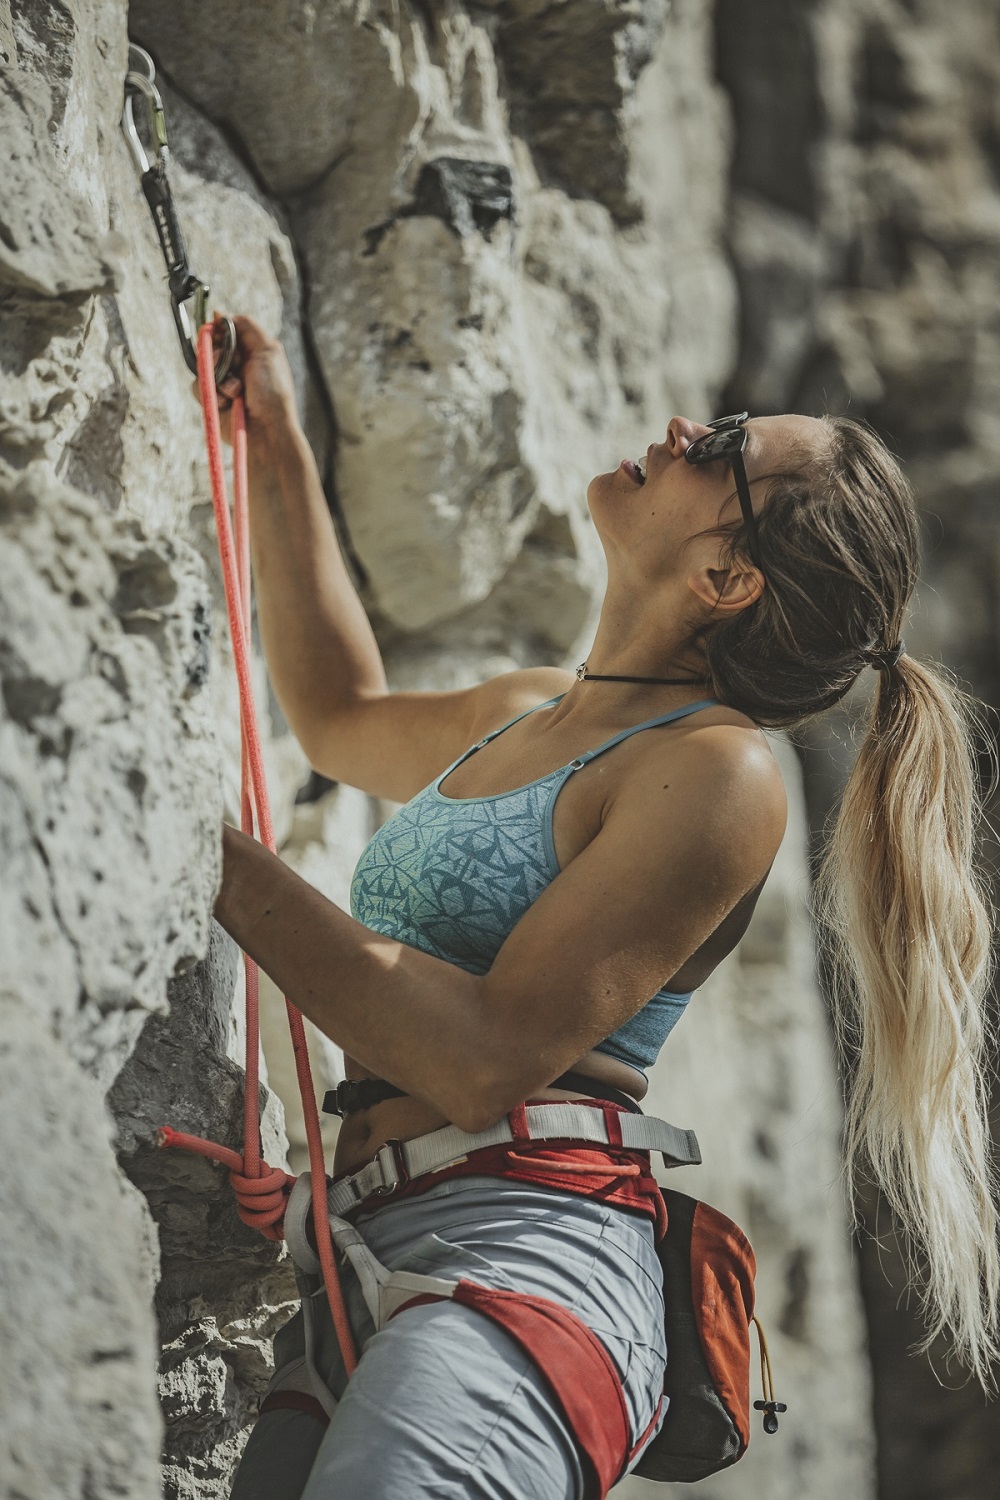 SunGod ambassador Lena Drapella is a climber and a professional outdoor photographer currently based in the UK. Photo: Stefano De Boni